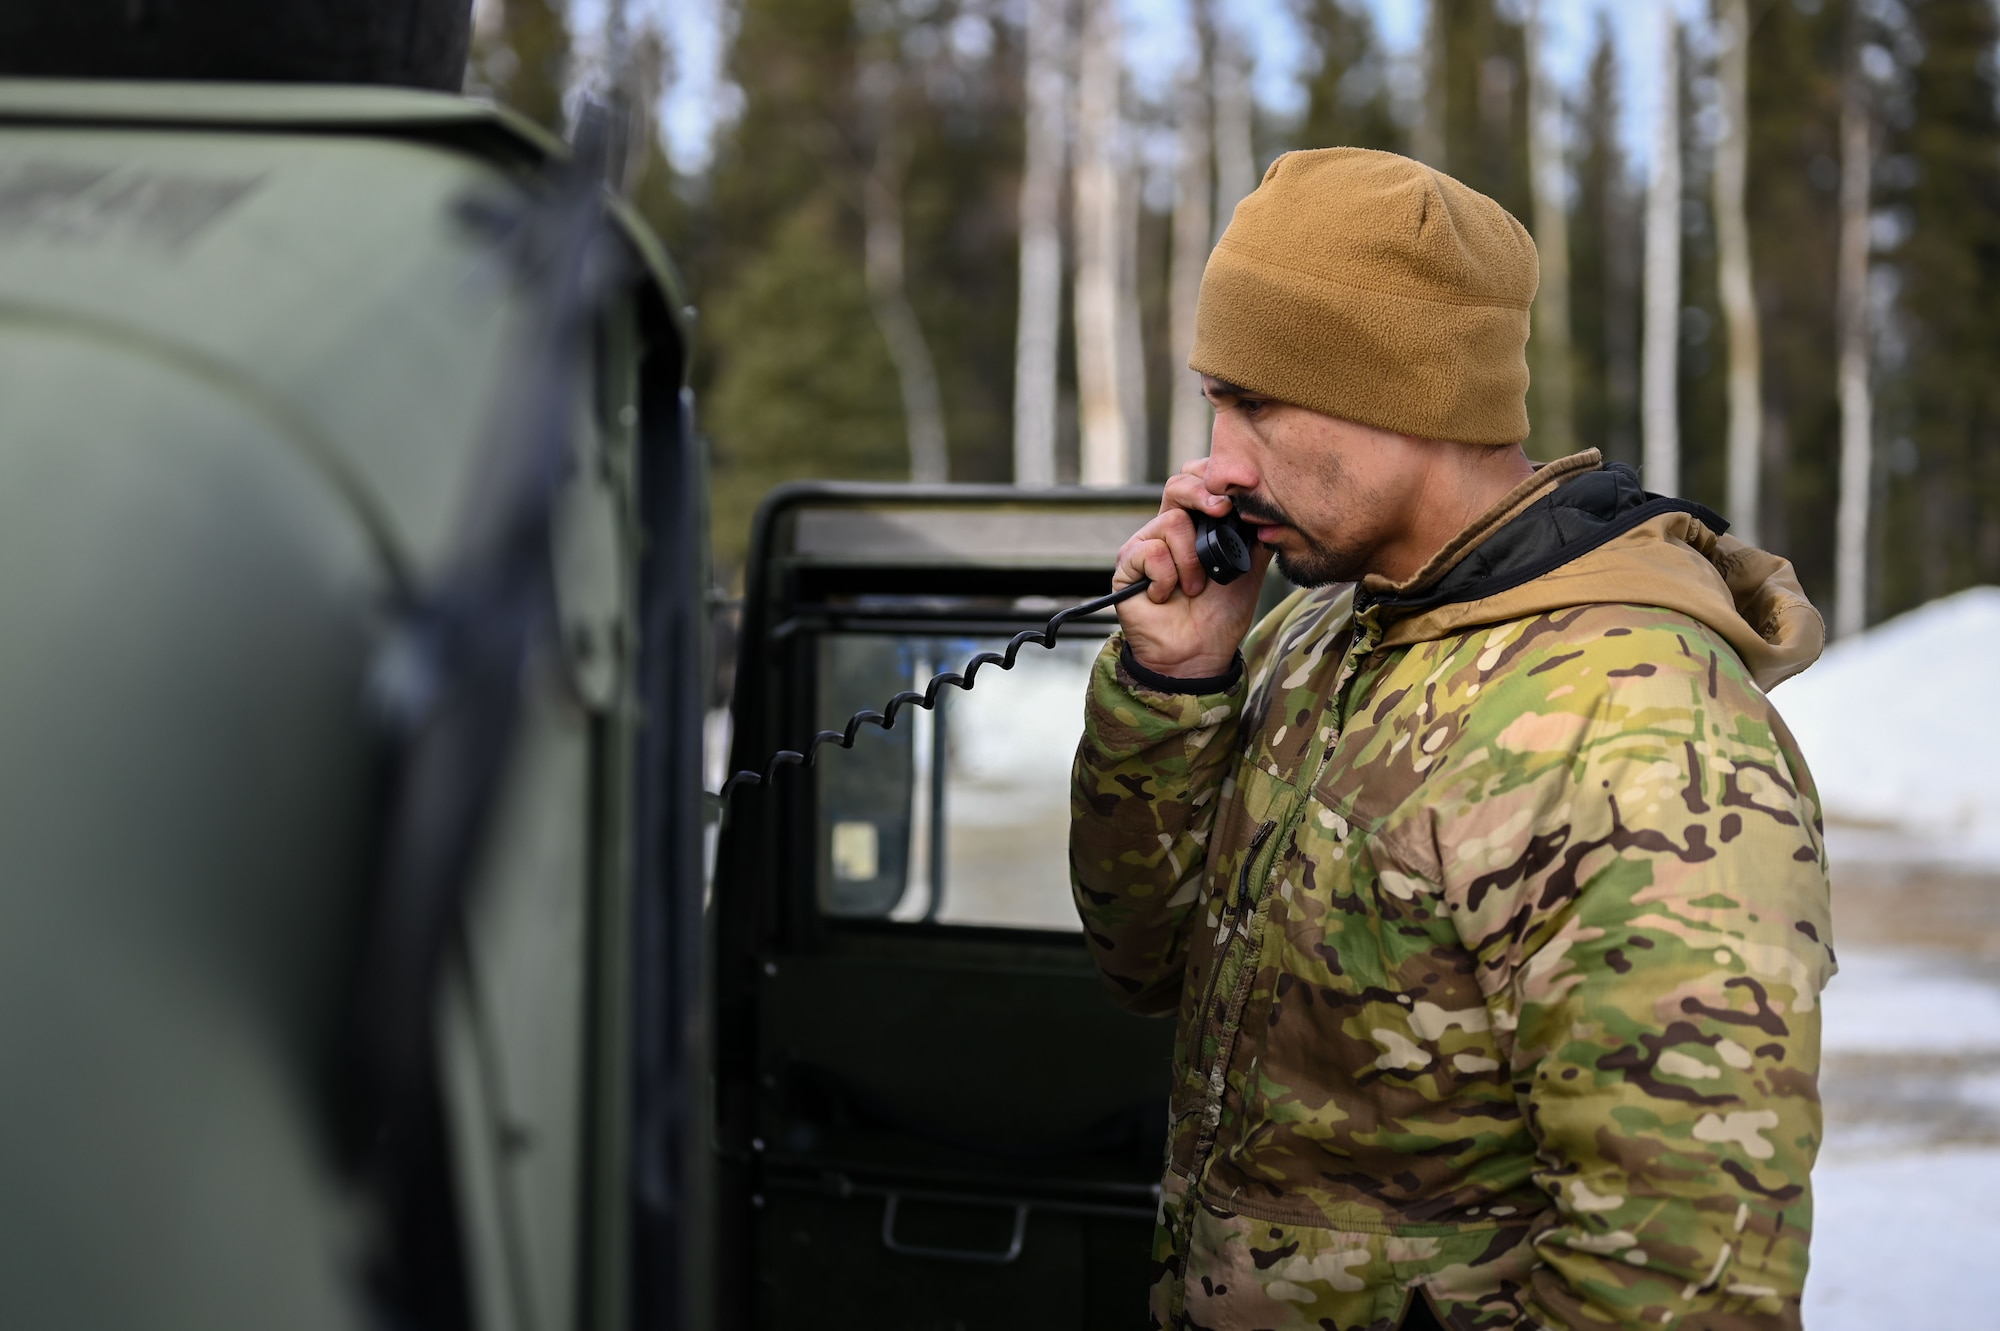 U.S. Air Force Capt. Edwardo Ramirez, 3rd Air Support Operations Squadron flight commander, receives updates from a sensory and effects team during an arctic training in Delta Junction, Alaska, March 22, 2023.